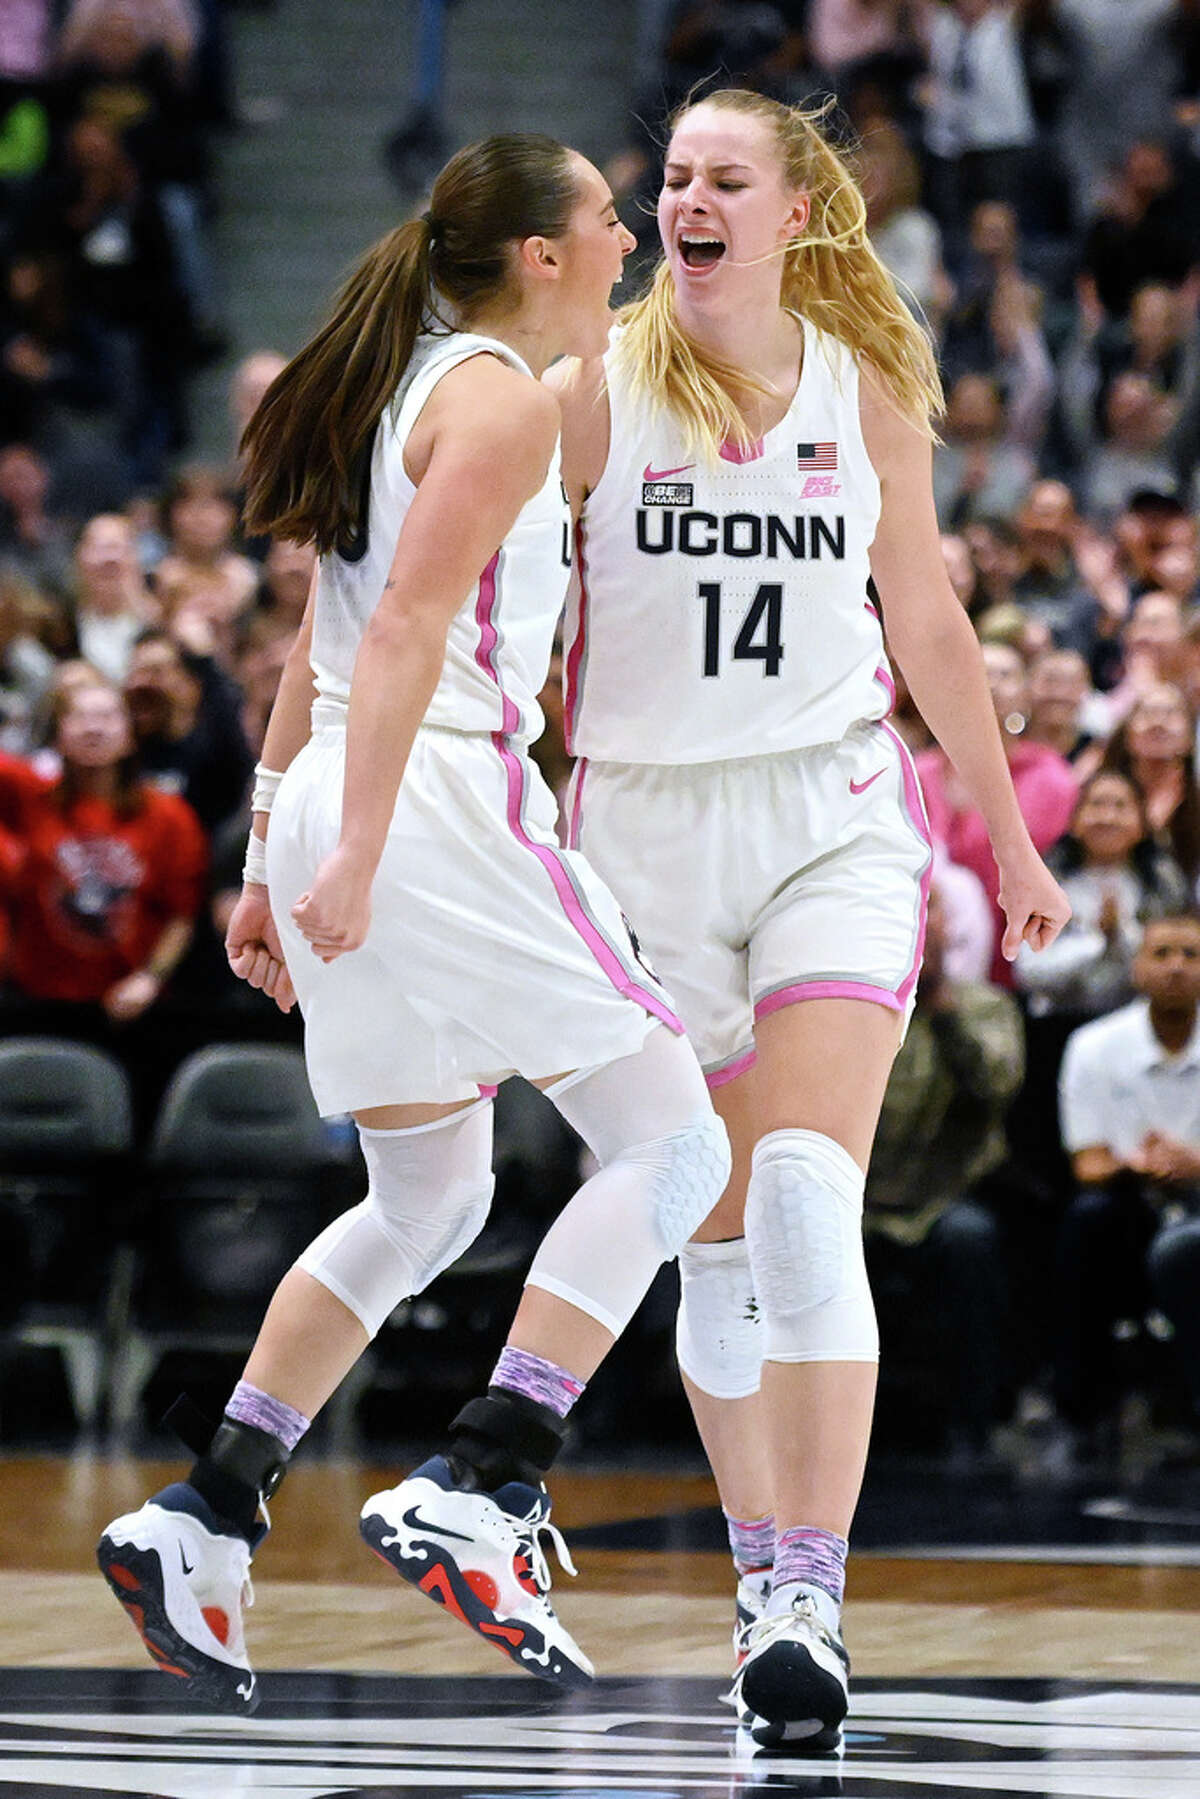 UConn's Dorka Juhasz (14) celebrates after her 3-point basket with teammate Nika Muhl in the second half of an NCAA college basketball game against Villanova, Sunday, Jan. 29, 2023, in Hartford, Conn. (AP Photo/Jessica Hill)